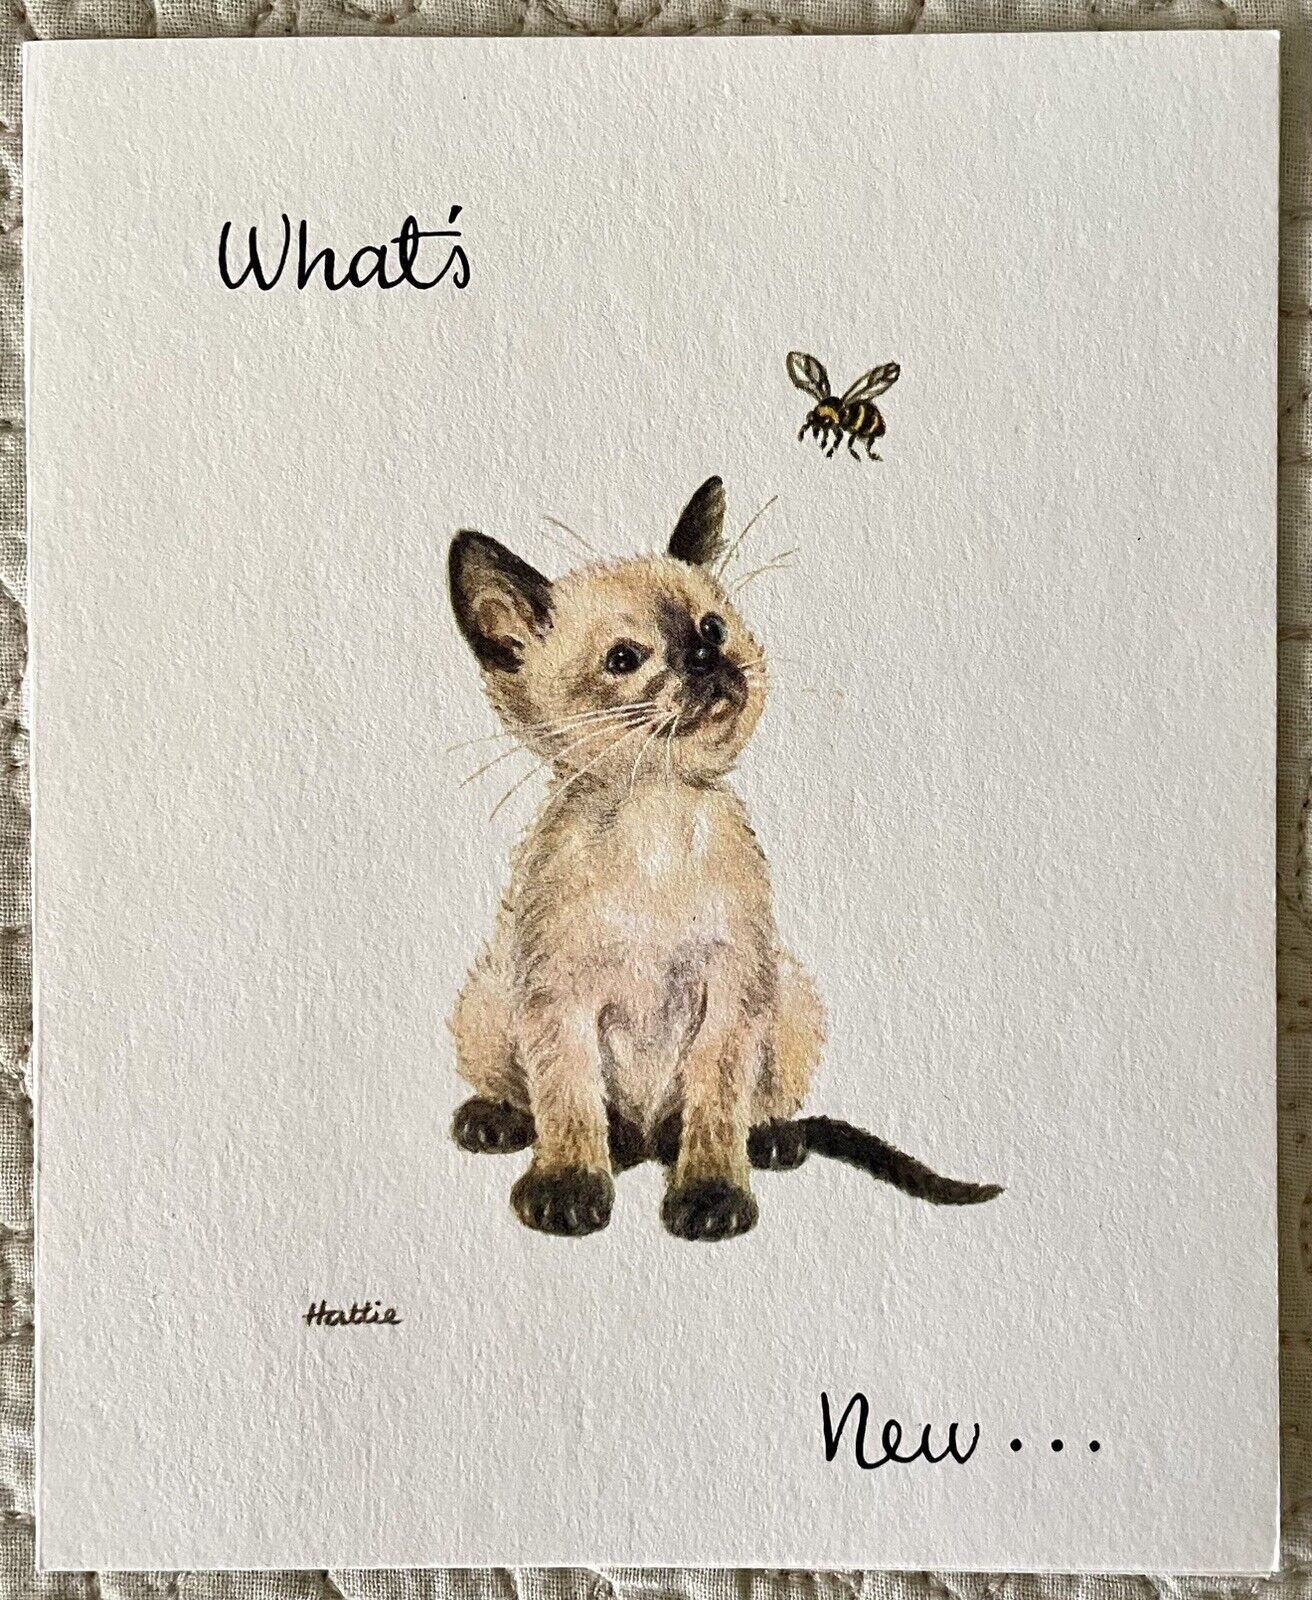 Unused Siamese Cat Kitten Whats Up Pussycat Note Vtg Greeting Card 1980s 1990s